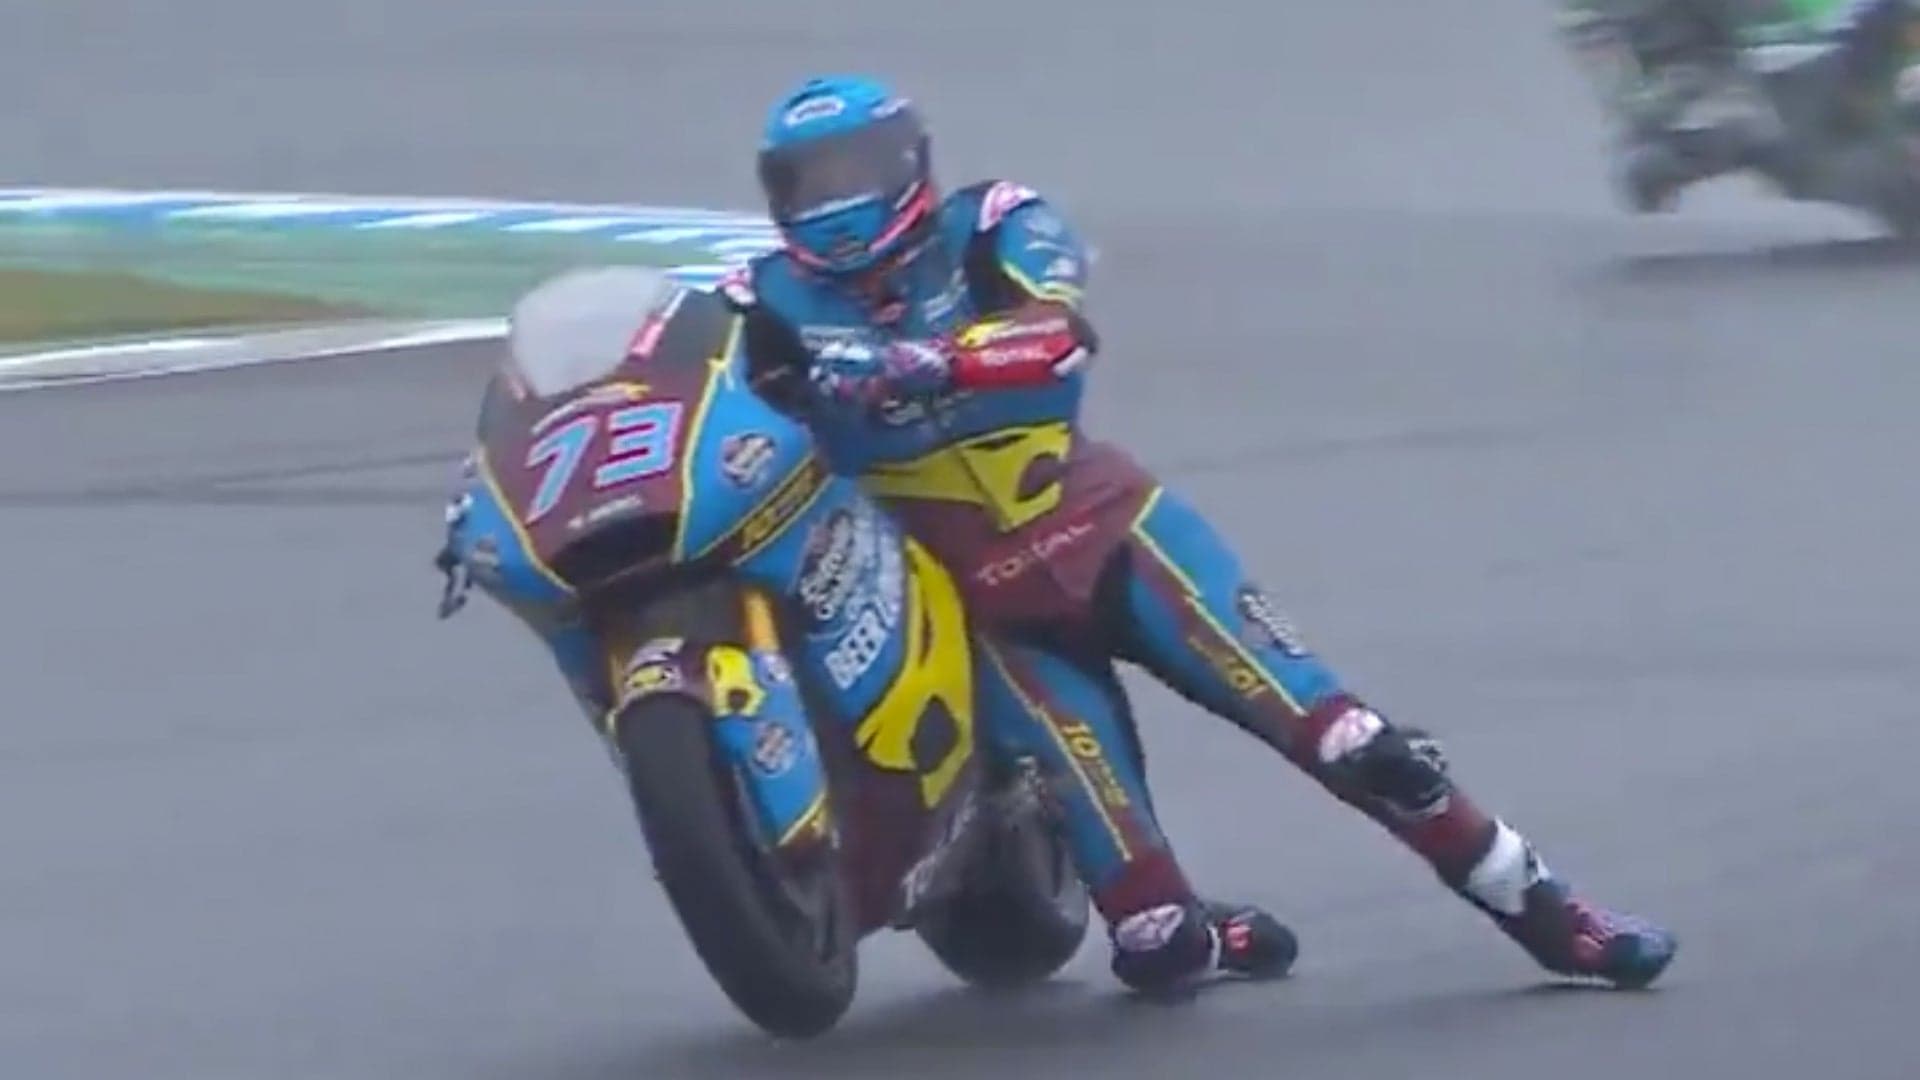 Watch Moto2 Rider Alex Marquez Pull off Heroic ‘Once in a Lifetime’ Crash Recovery